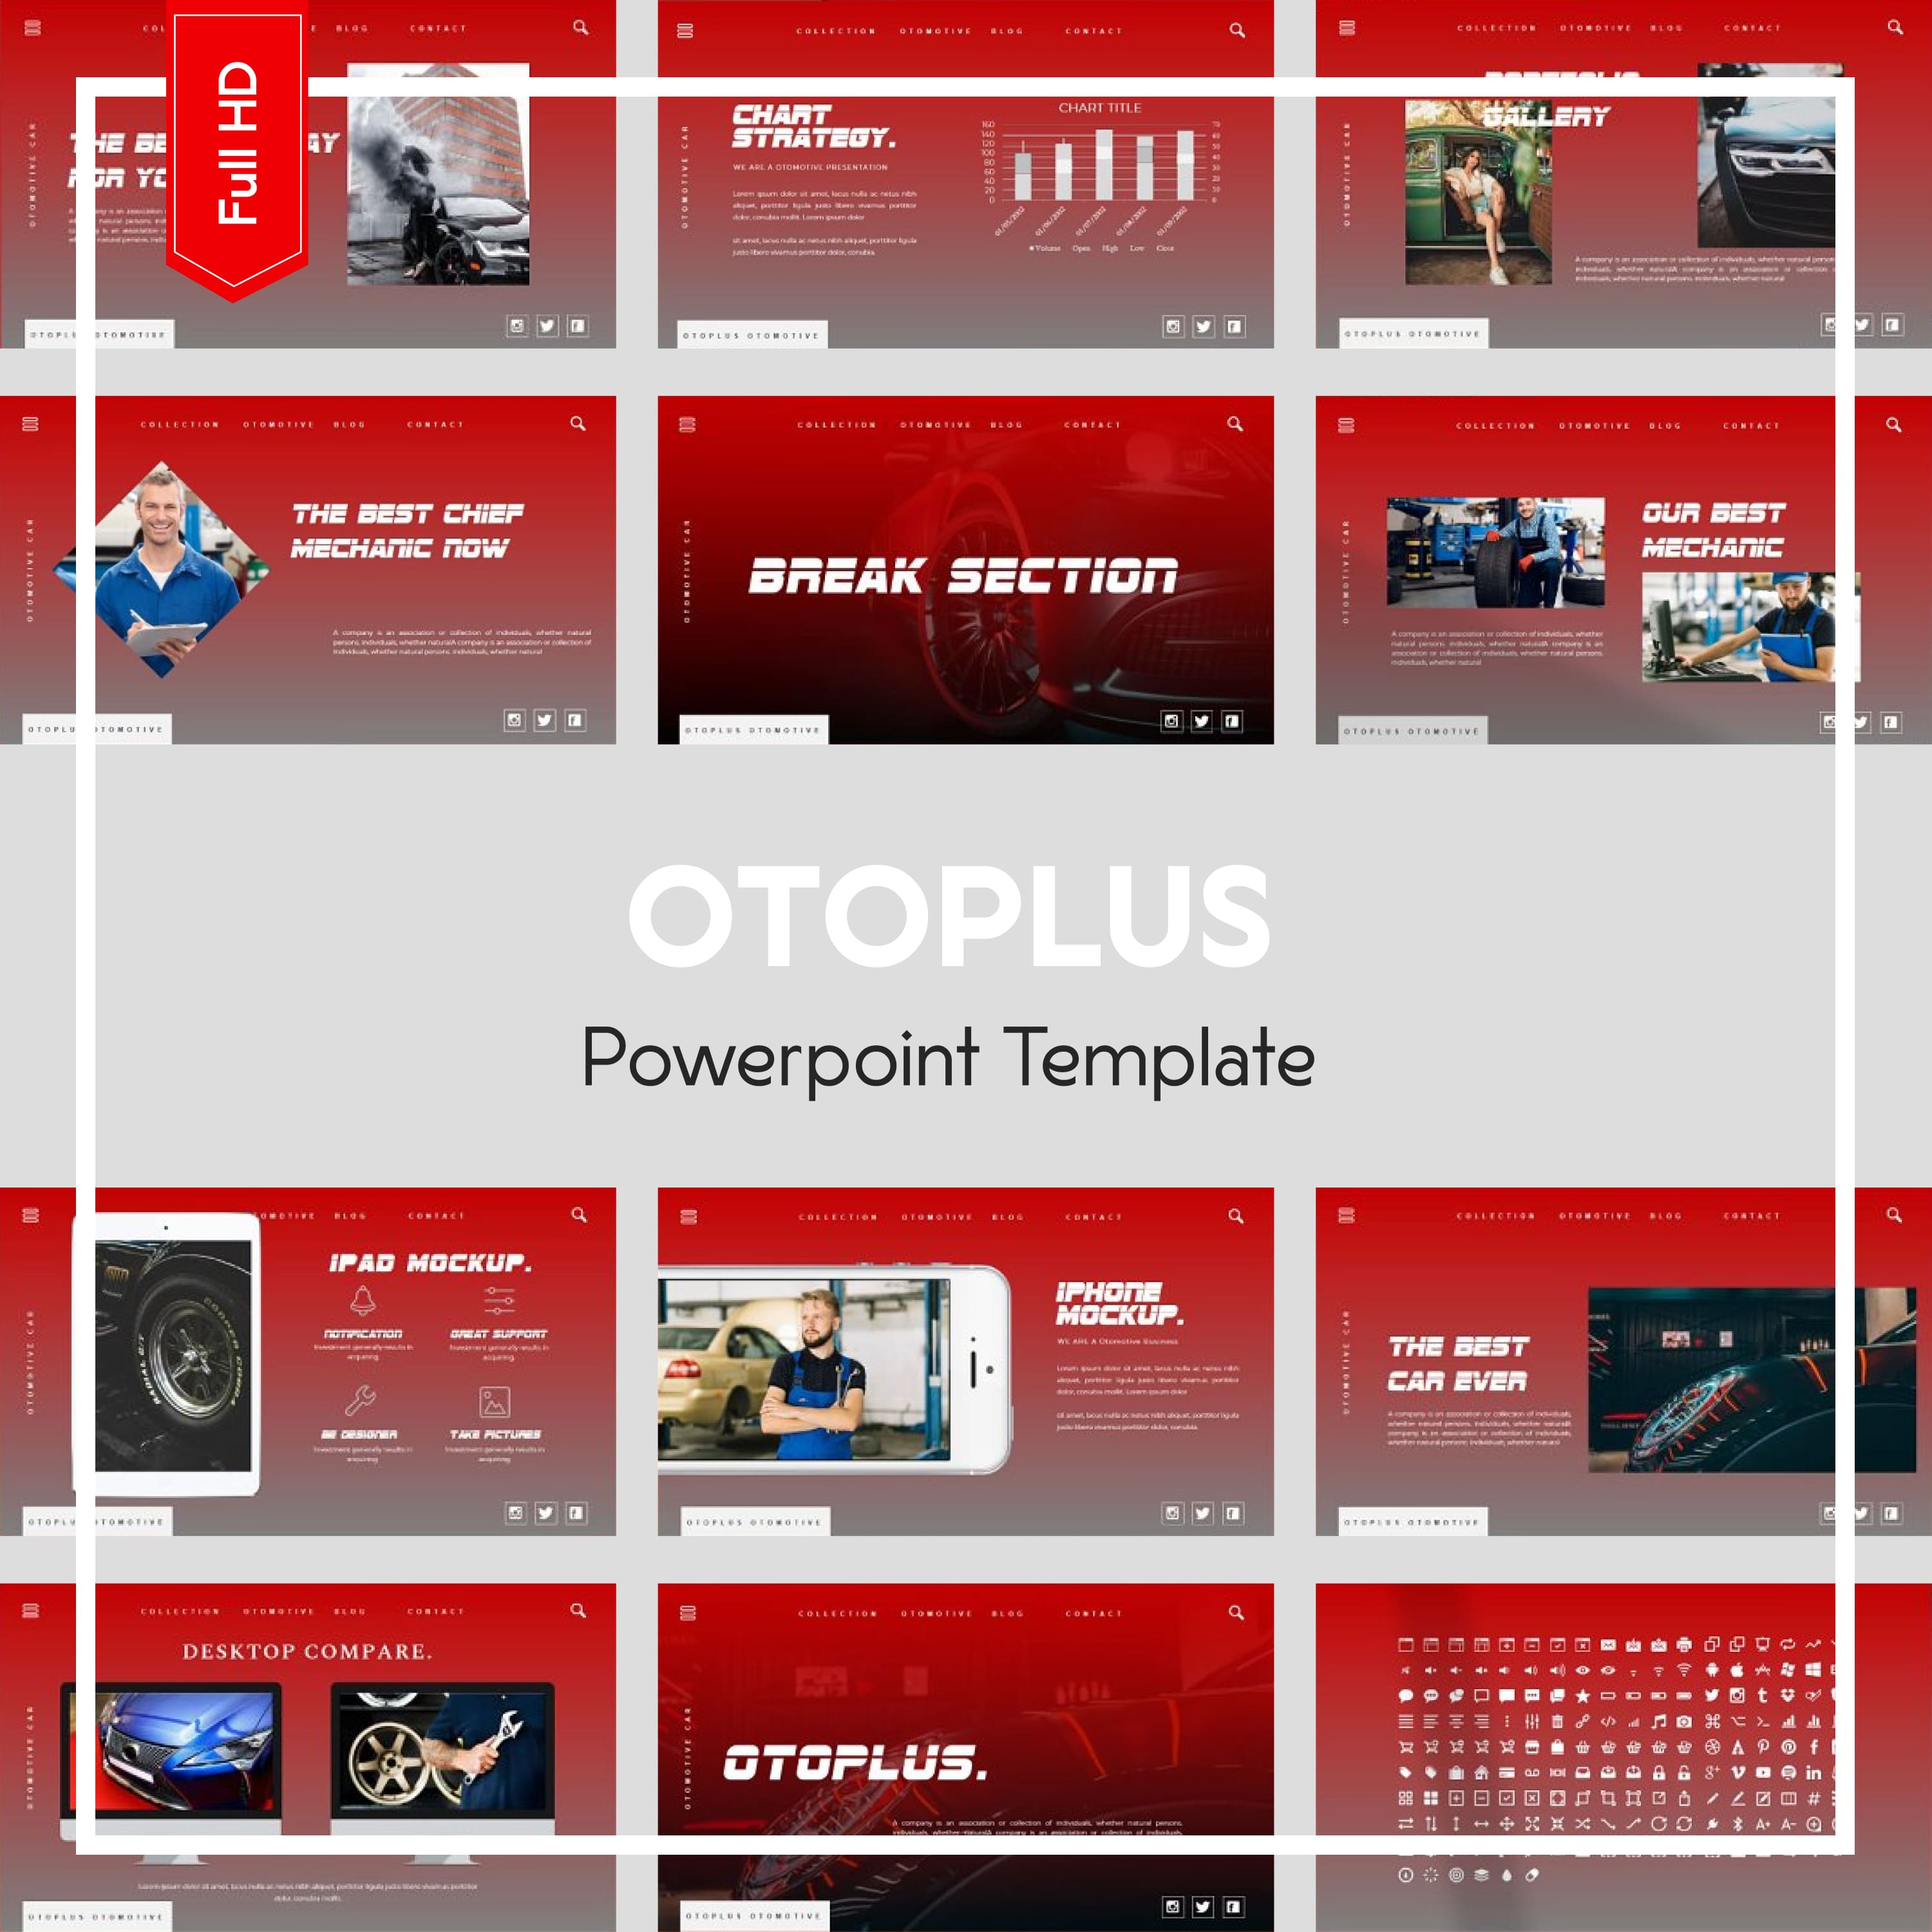 Otoplus powerpoint template - main image preview.